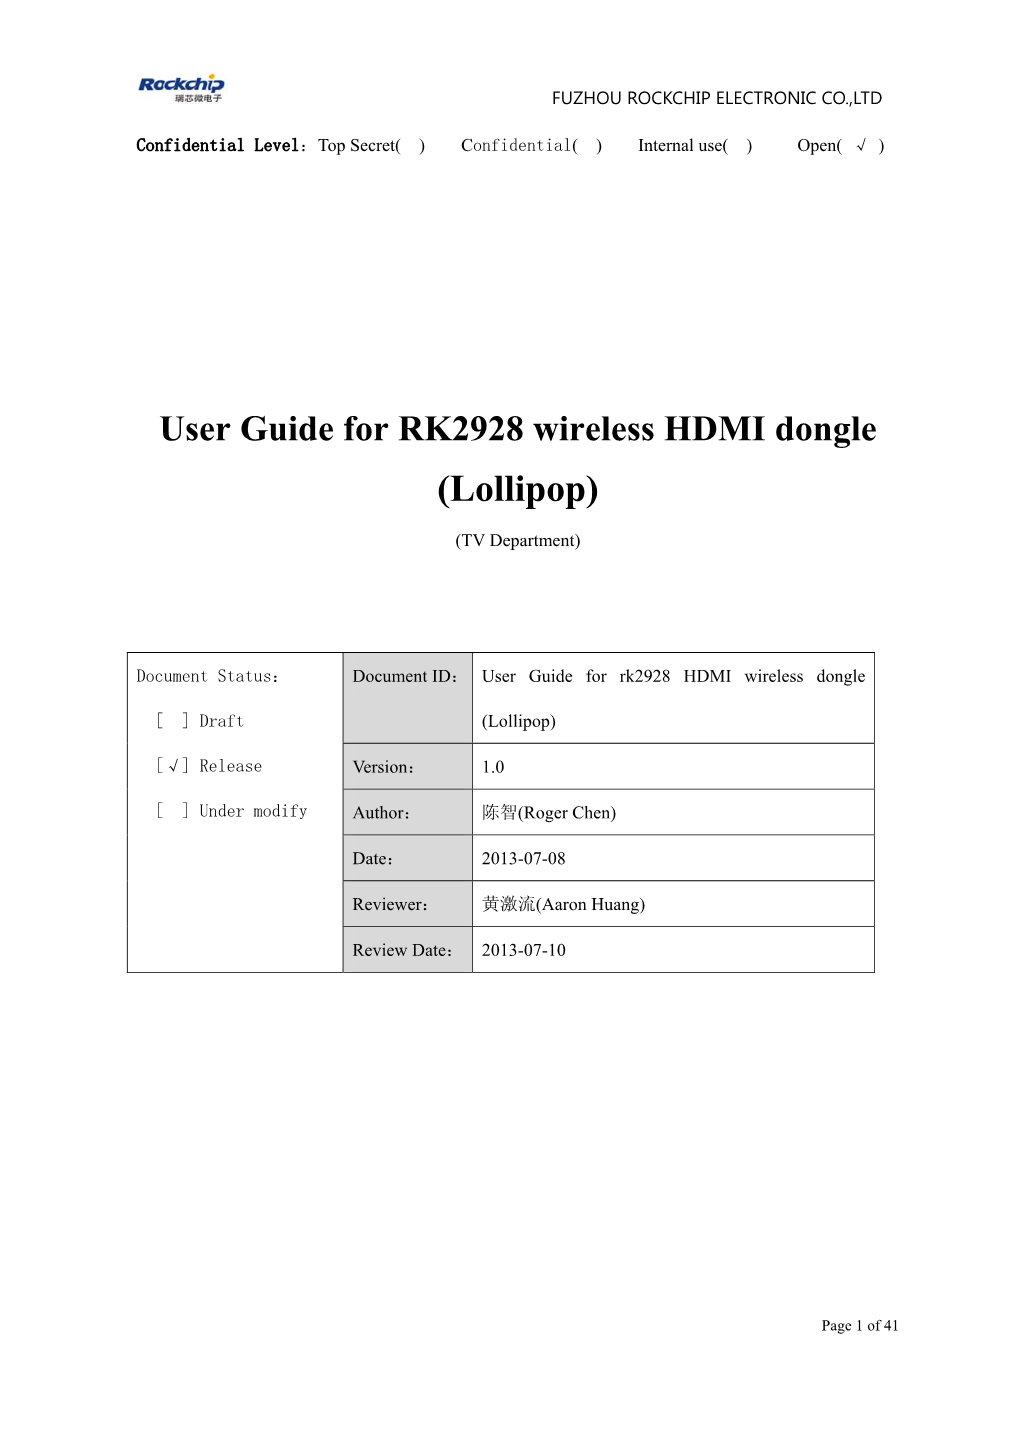 User Guide for RK2928 Wireless HDMI Dongle (Lollipop)